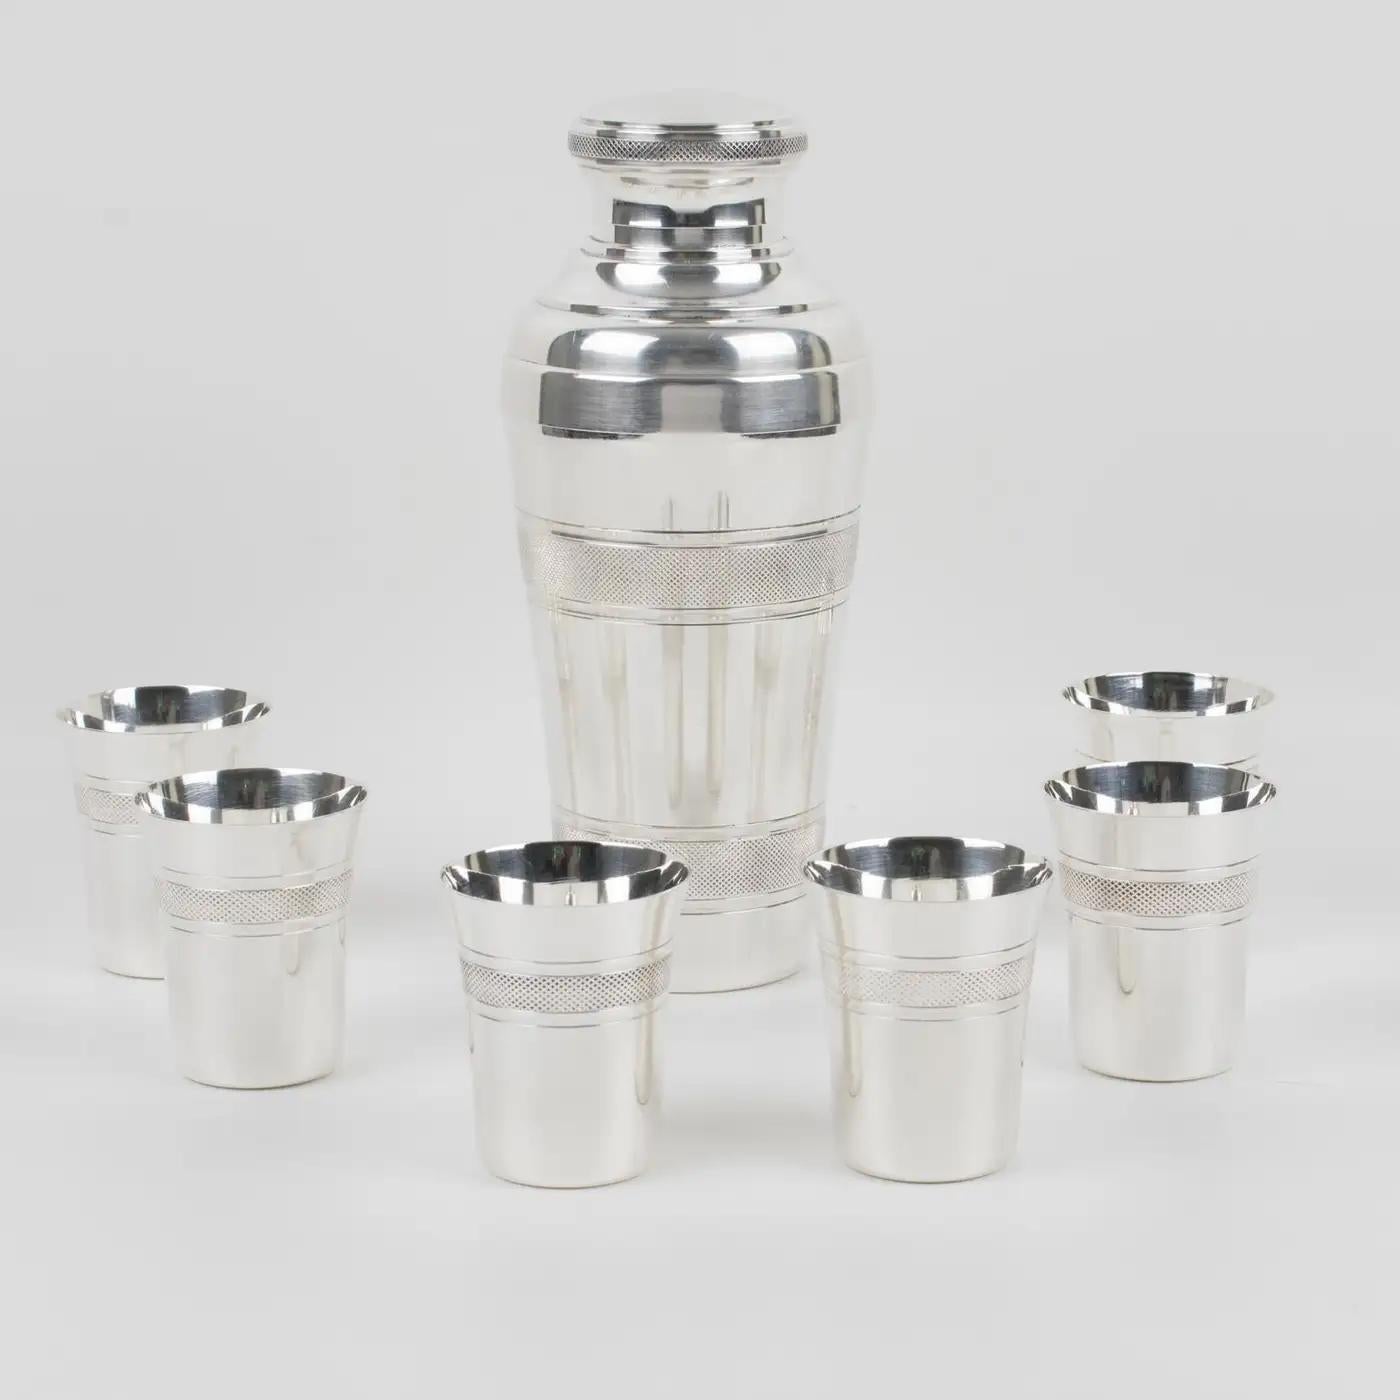 Silversmith Societe Generale de Coutellerie et Orfevrerie (successor of Francois Frionnet), Paris, designed this elegant Art Deco silver plate barware serving set in the 1940s. The three-sectioned designed cylindrical cocktail or Martini shaker has